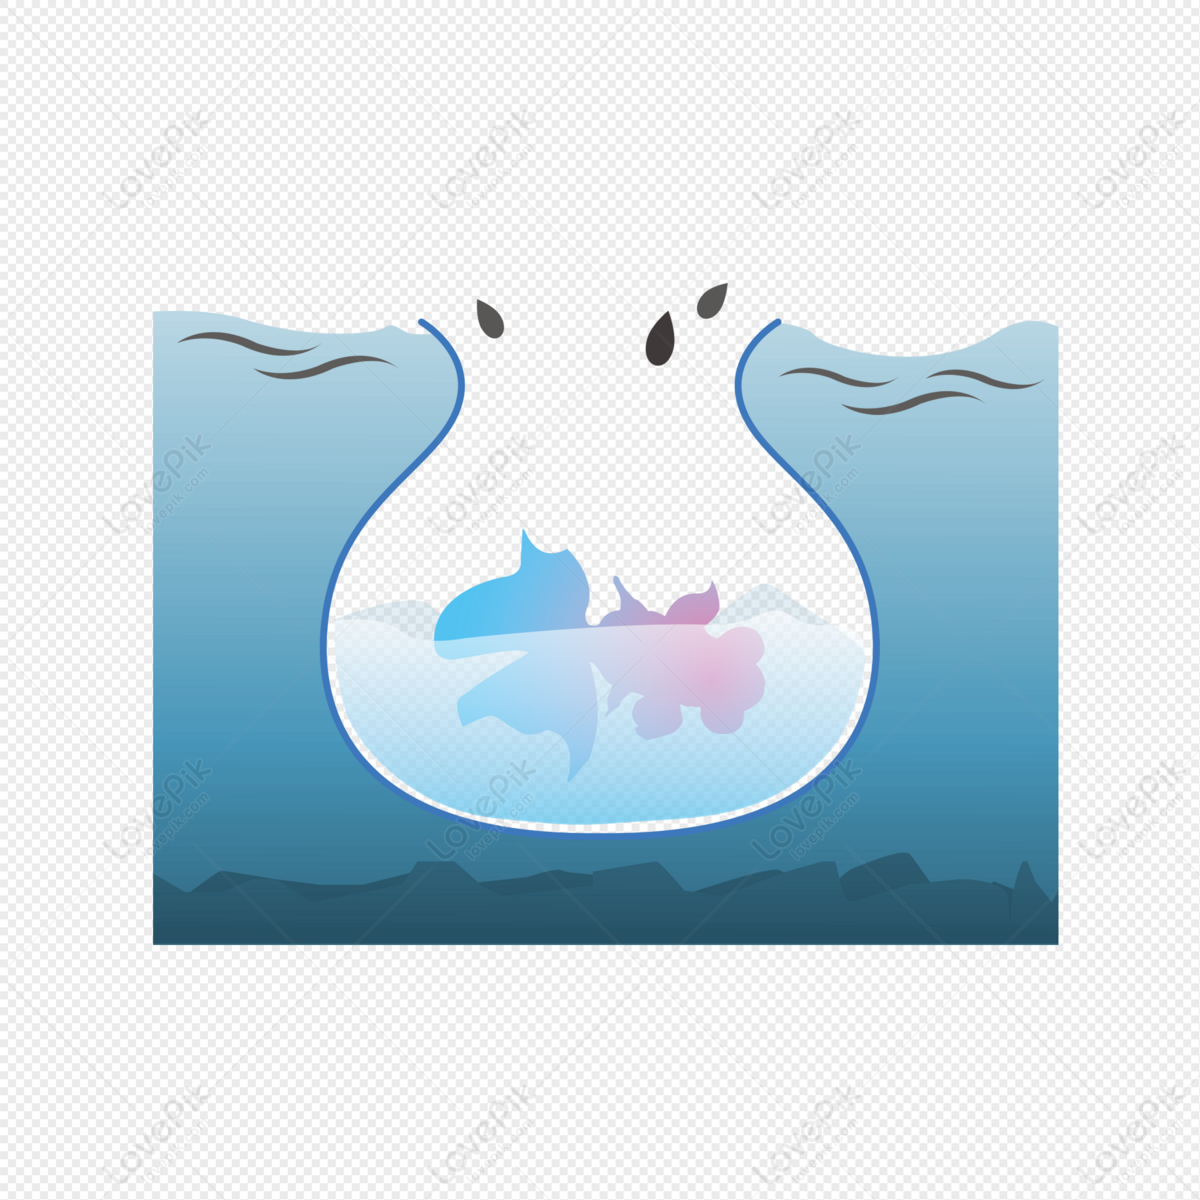 Water Pollution PNG Picture And Clipart Image For Free Download - Lovepik |  401295785